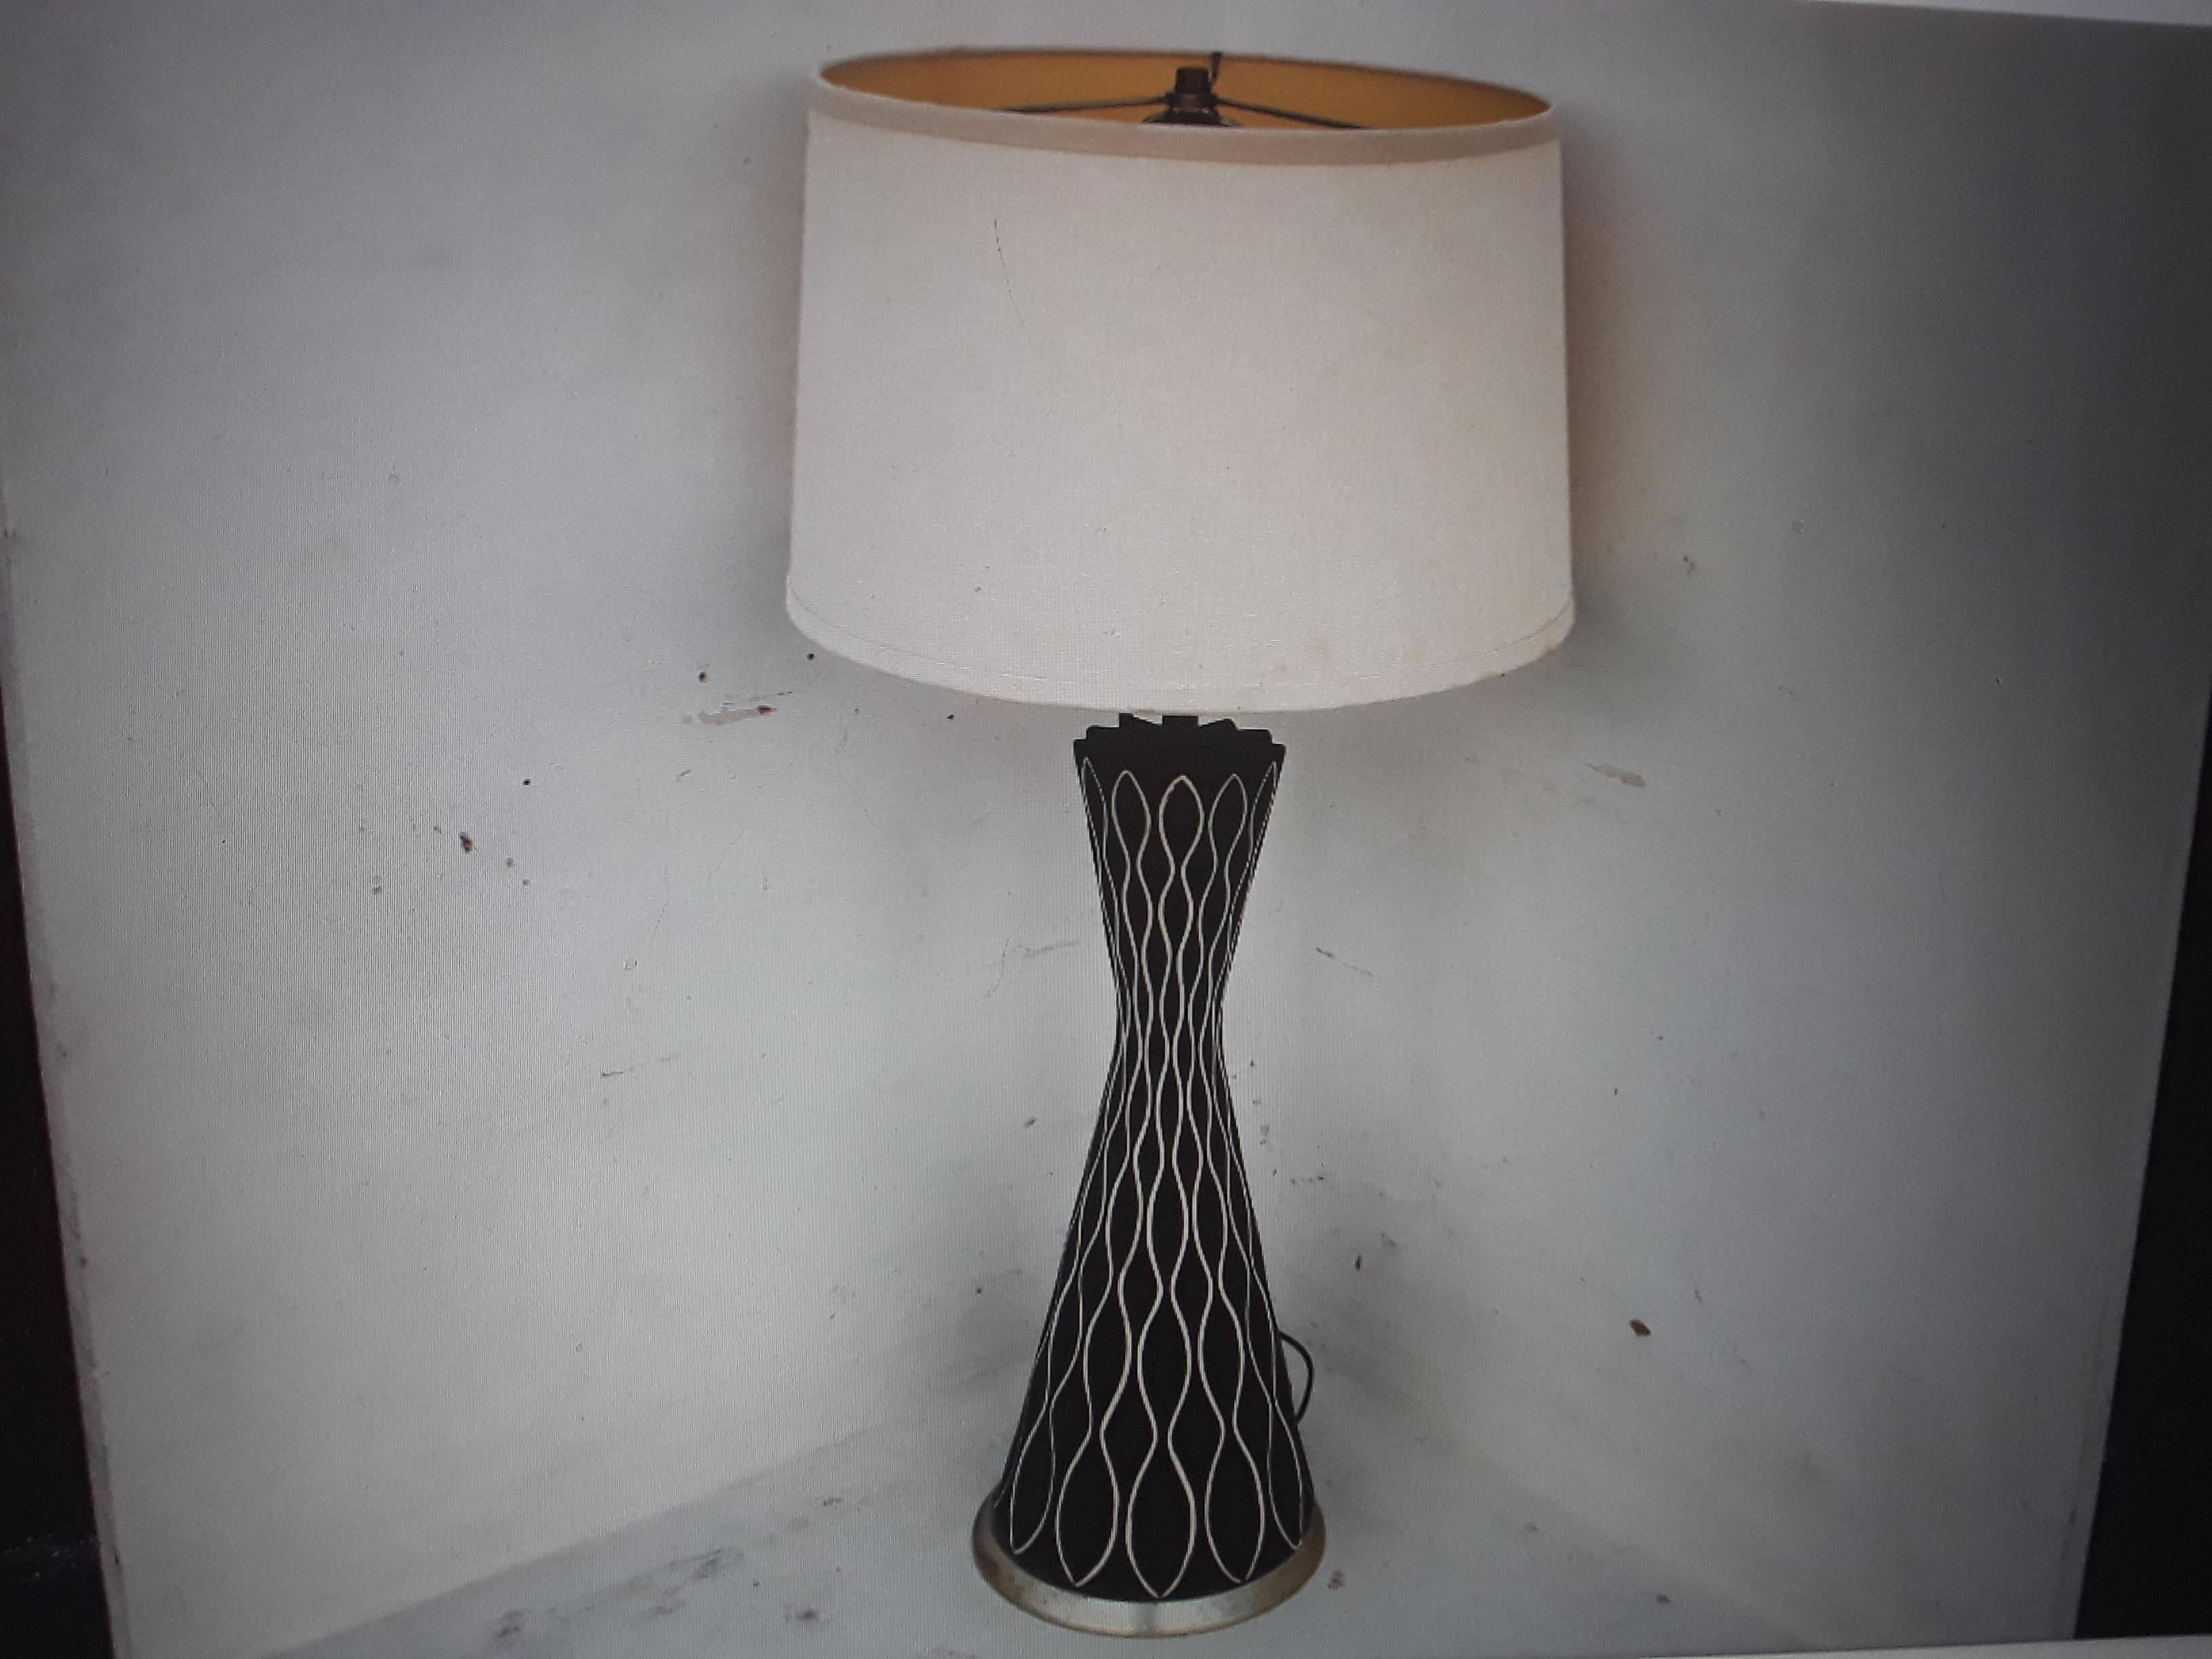 1960's Atomic Age Mid Century Modern Futuristic 3 Light Table Lamp For Sale 4